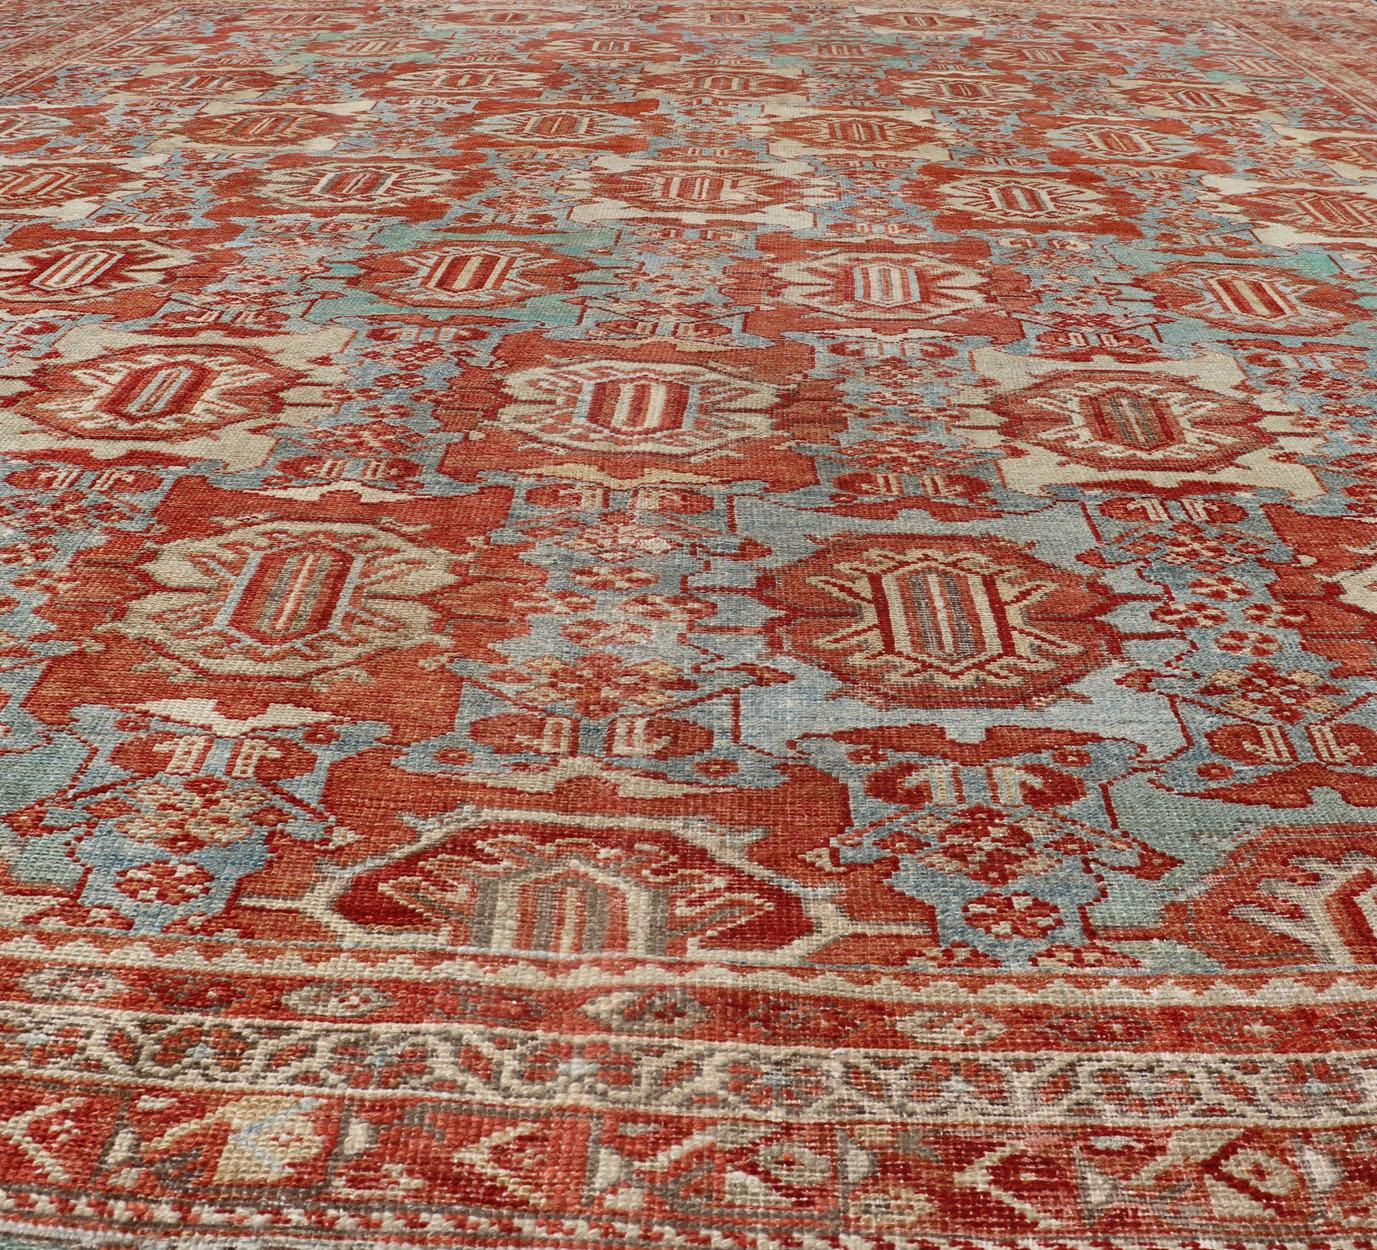 Large Scale Antique Persian Hamedan Rug with Colorful Blossom Design For Sale 2